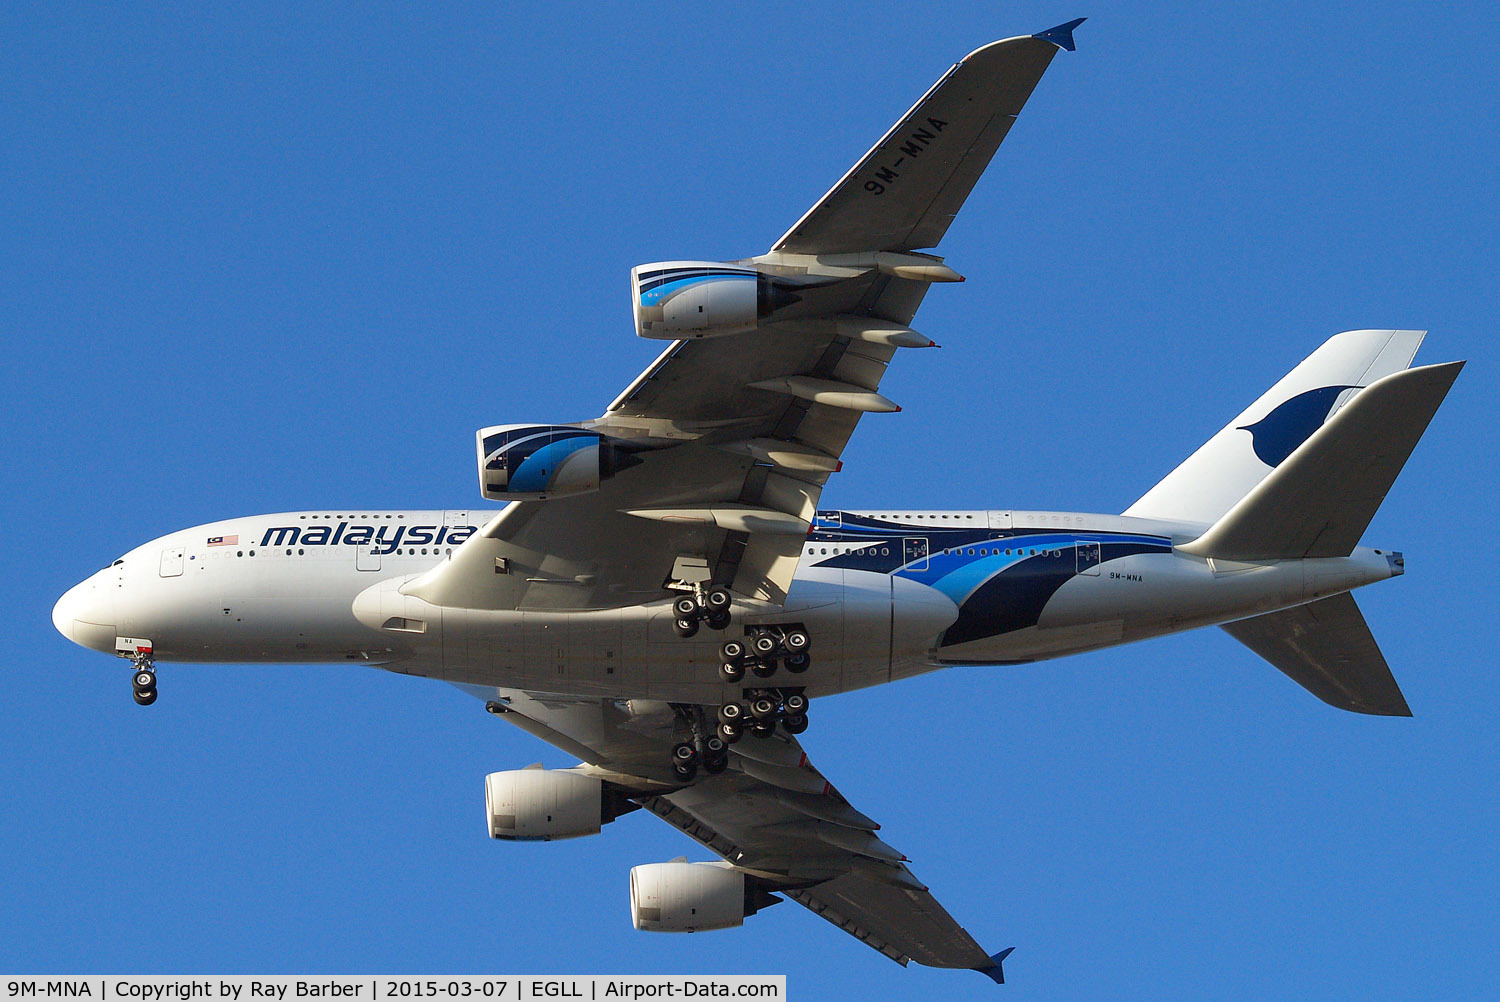 9M-MNA, 2011 Airbus A380-841 C/N 078, Airbus A380-841 [078] (Malaysia Airlines) Home~G 07/03/2015. On approach 27R.